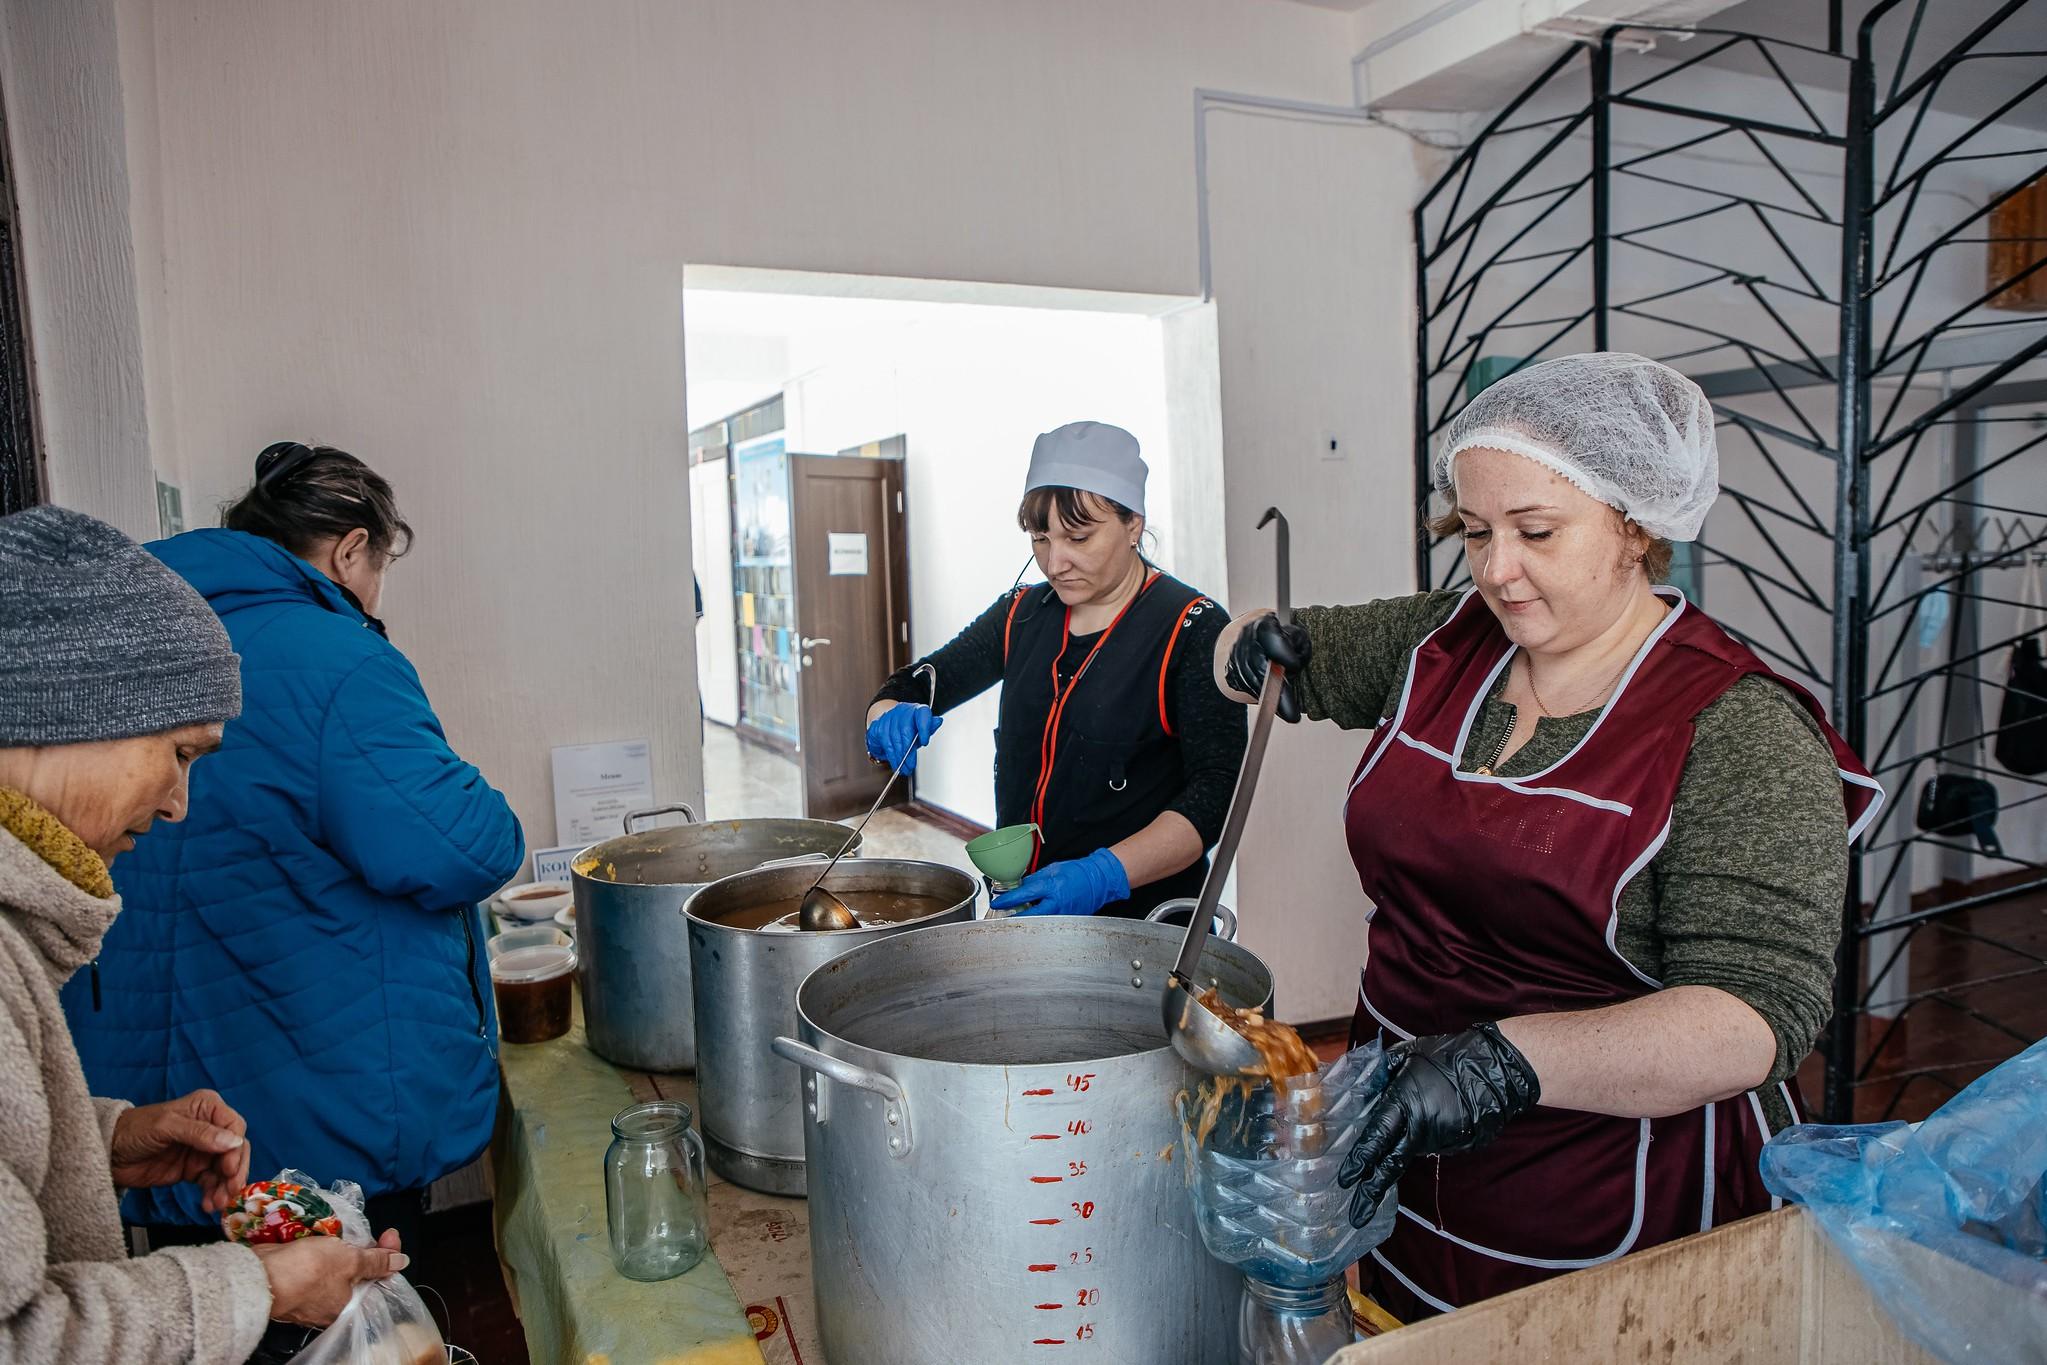 A woman distributes soup in one of the "heating points" in Kharkiv that LWF supports.